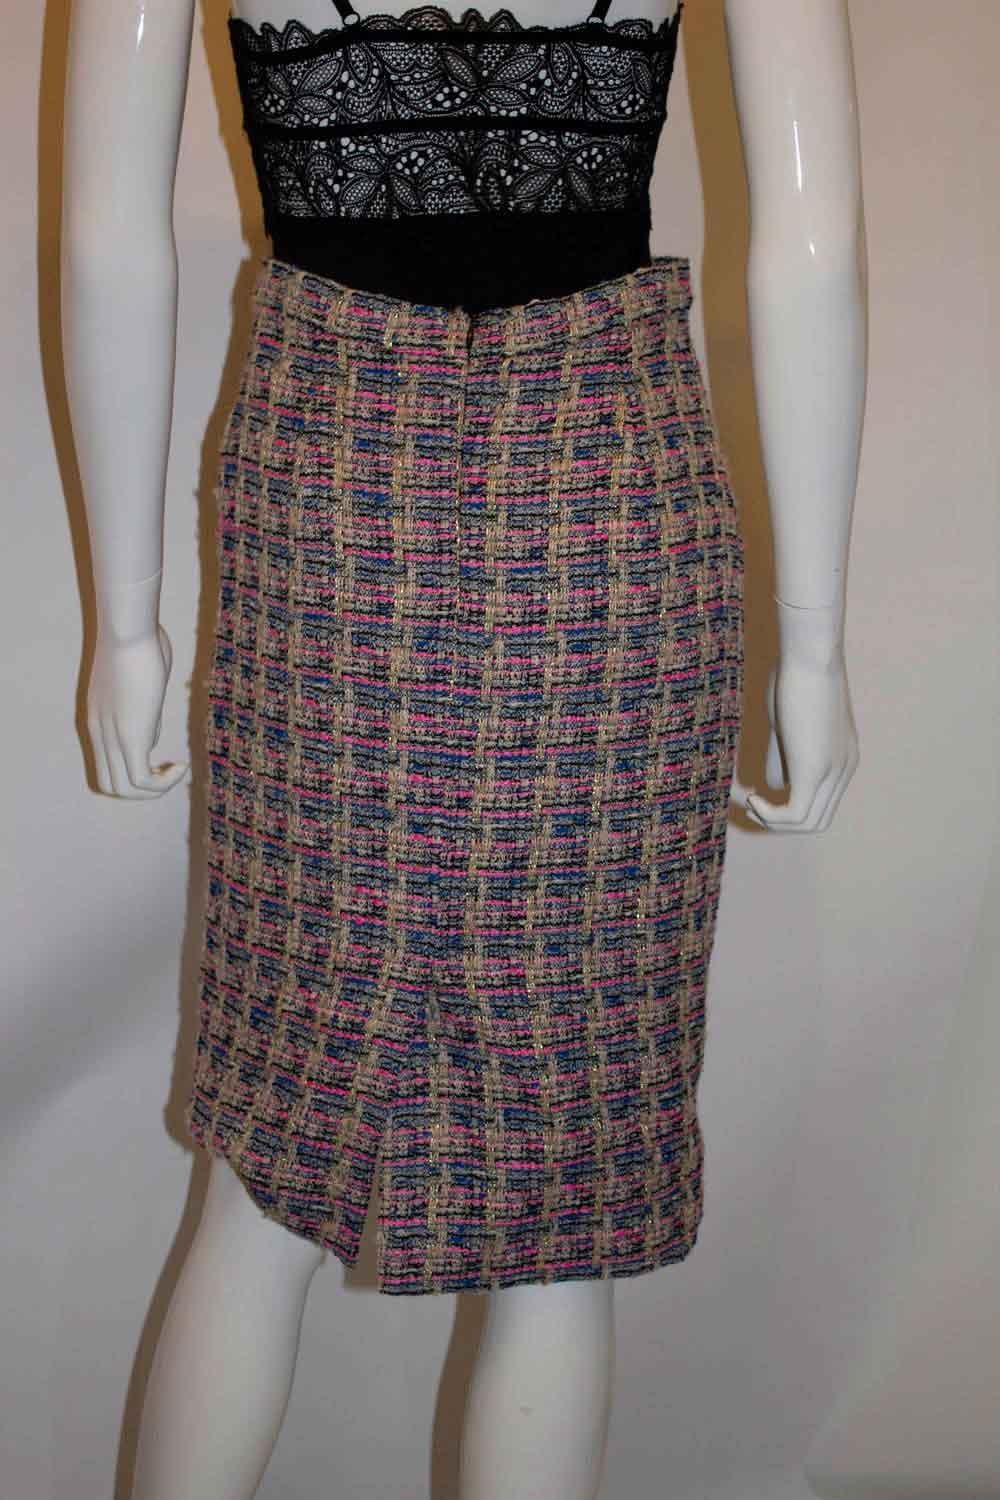 Erdem Multi Colour Boucle Skirt In Good Condition For Sale In London, GB